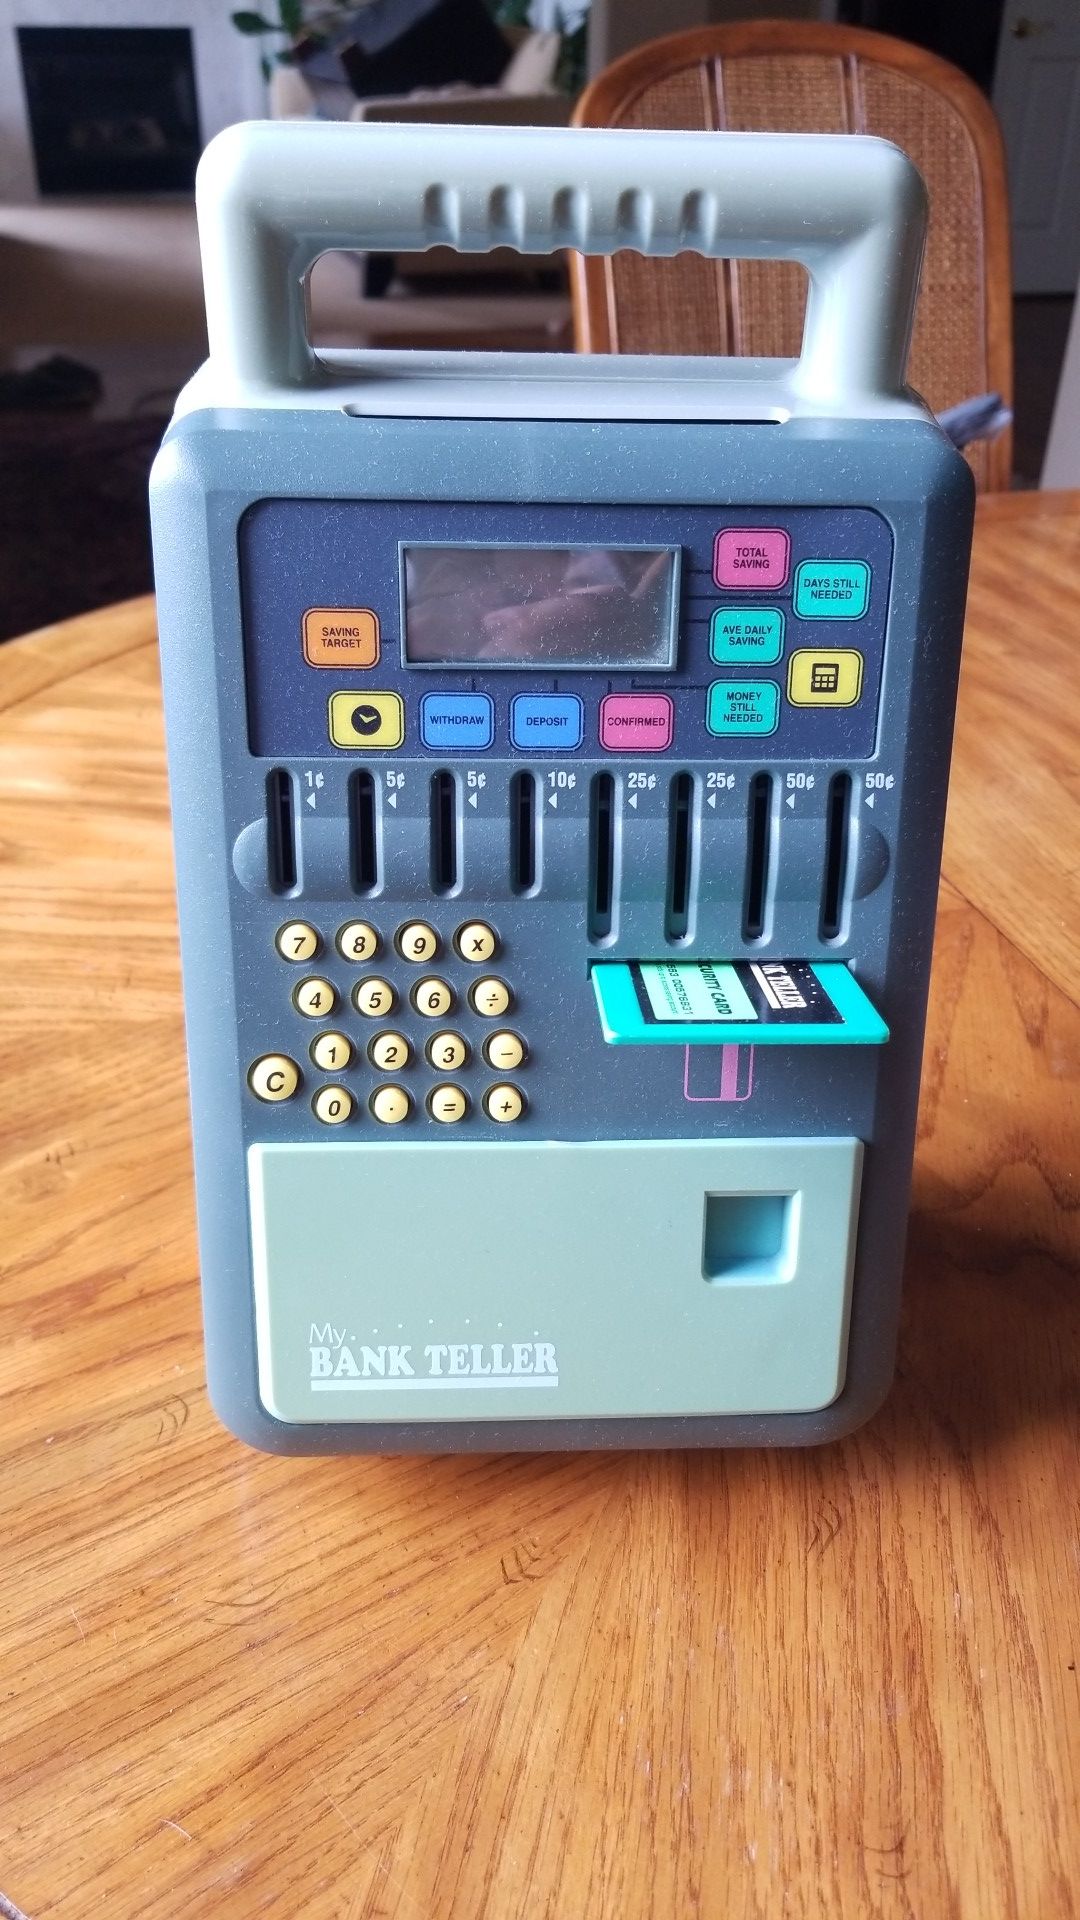 My...BANK TELLER toy from the 90's